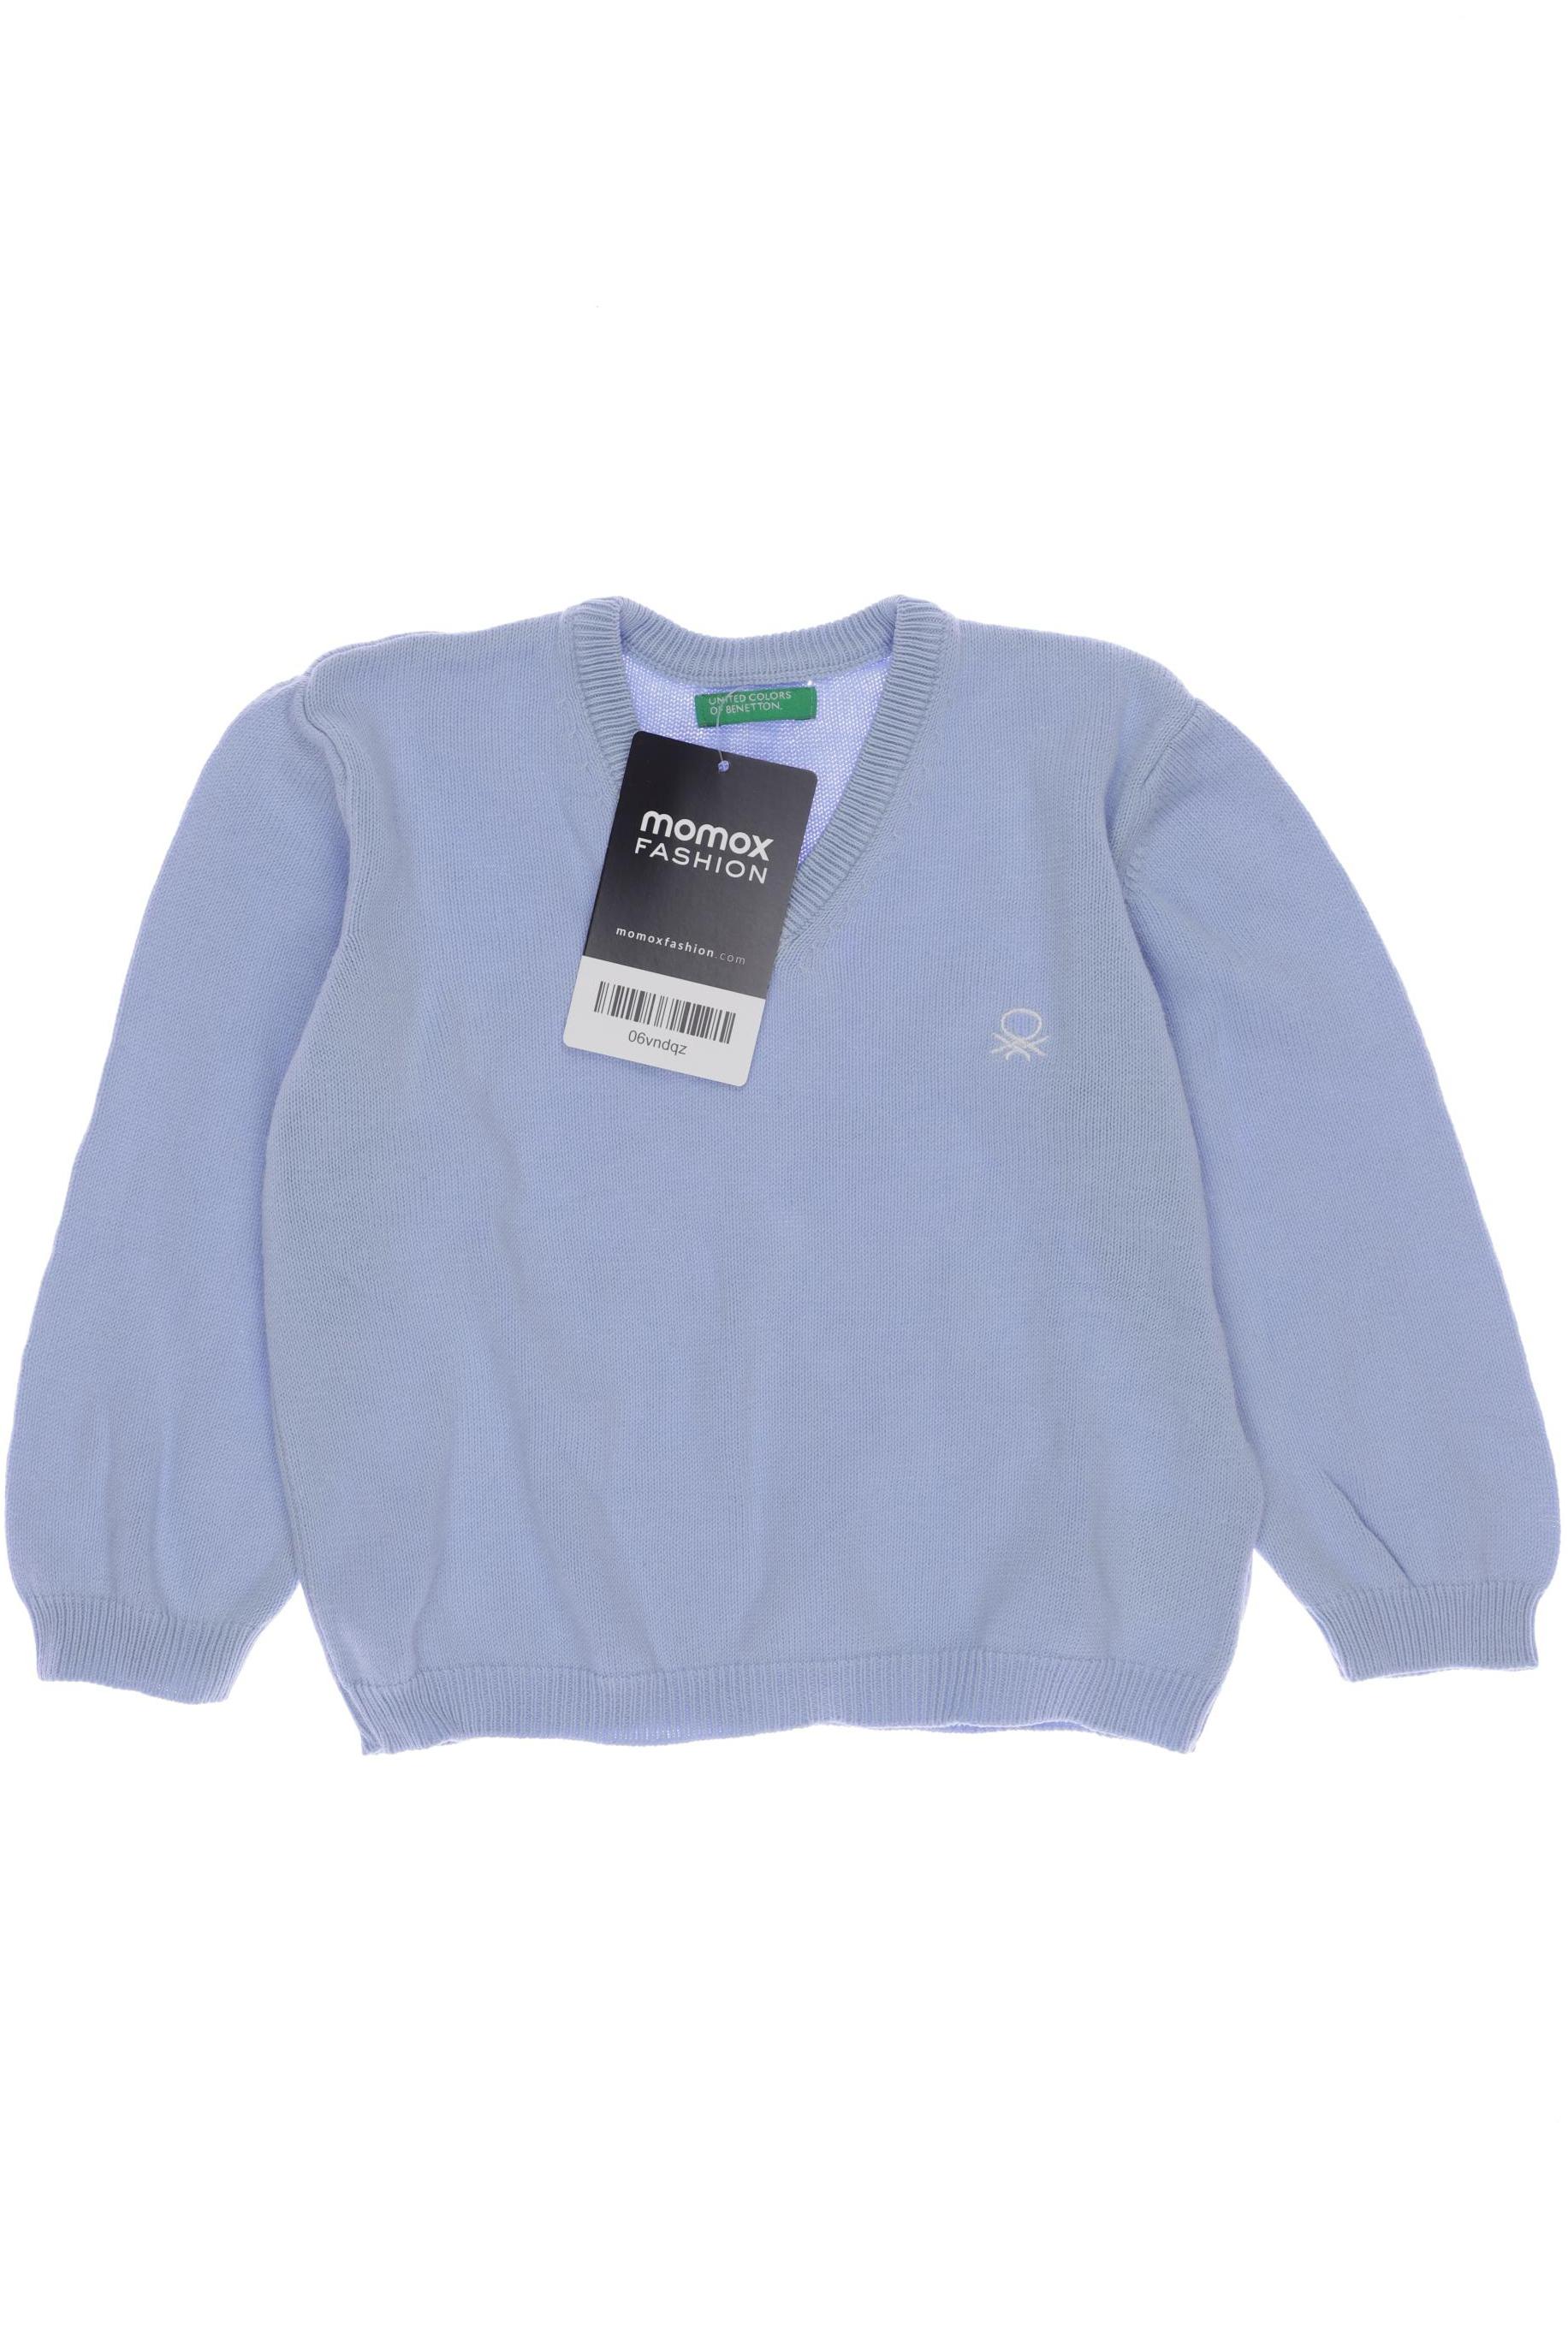 UNITED COLORS OF BENETTON Jungen Pullover, hellblau von United Colors of Benetton